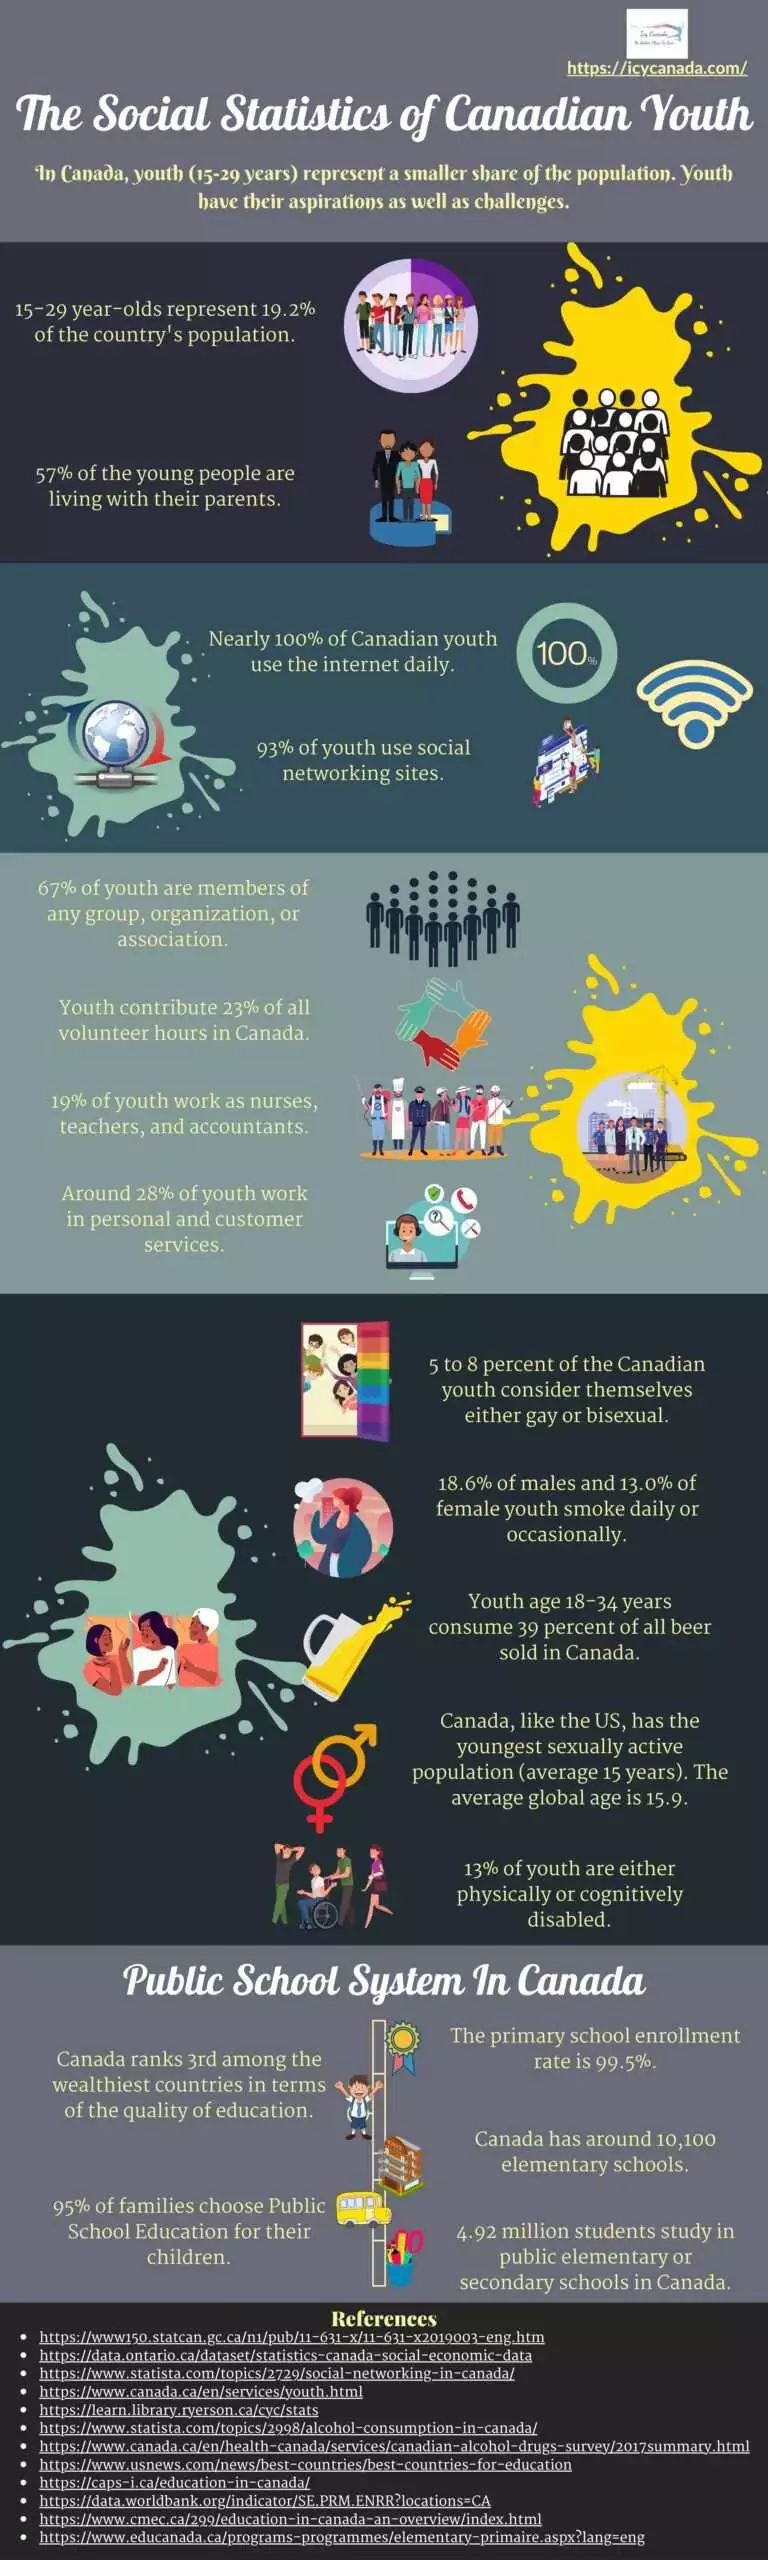 The Social Statistics of Canadian Youth